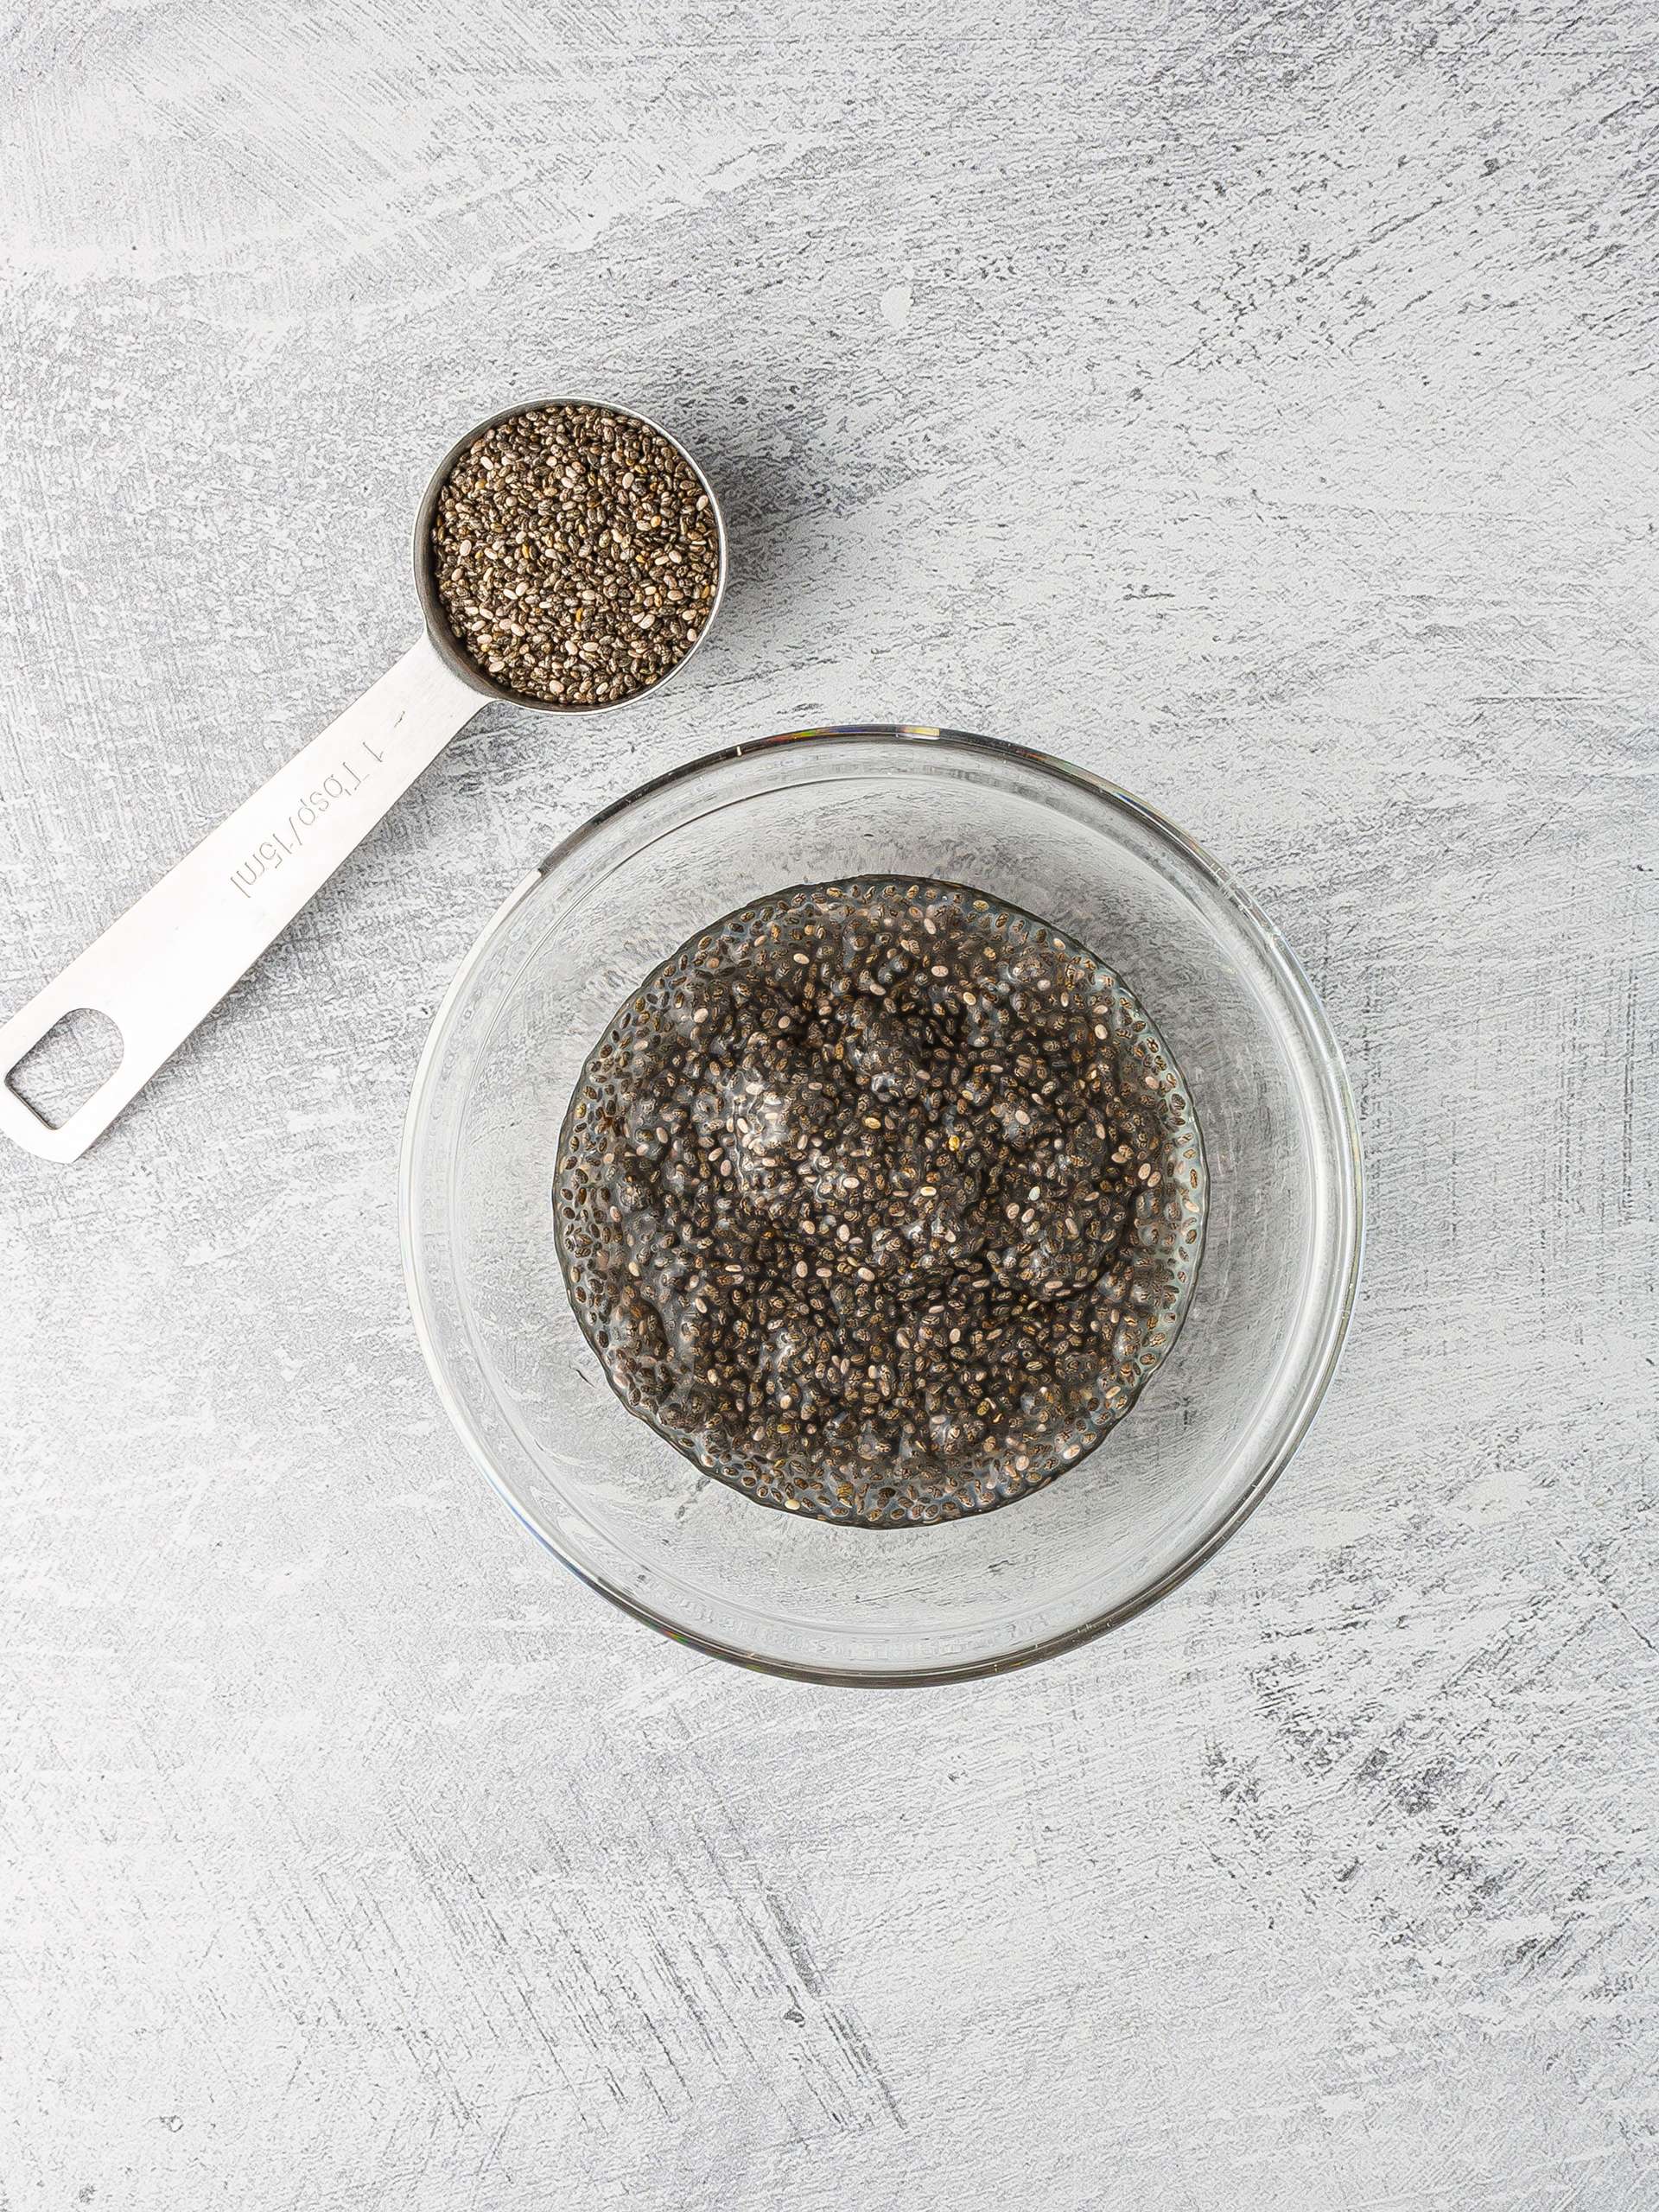 Soaked chia seeds.